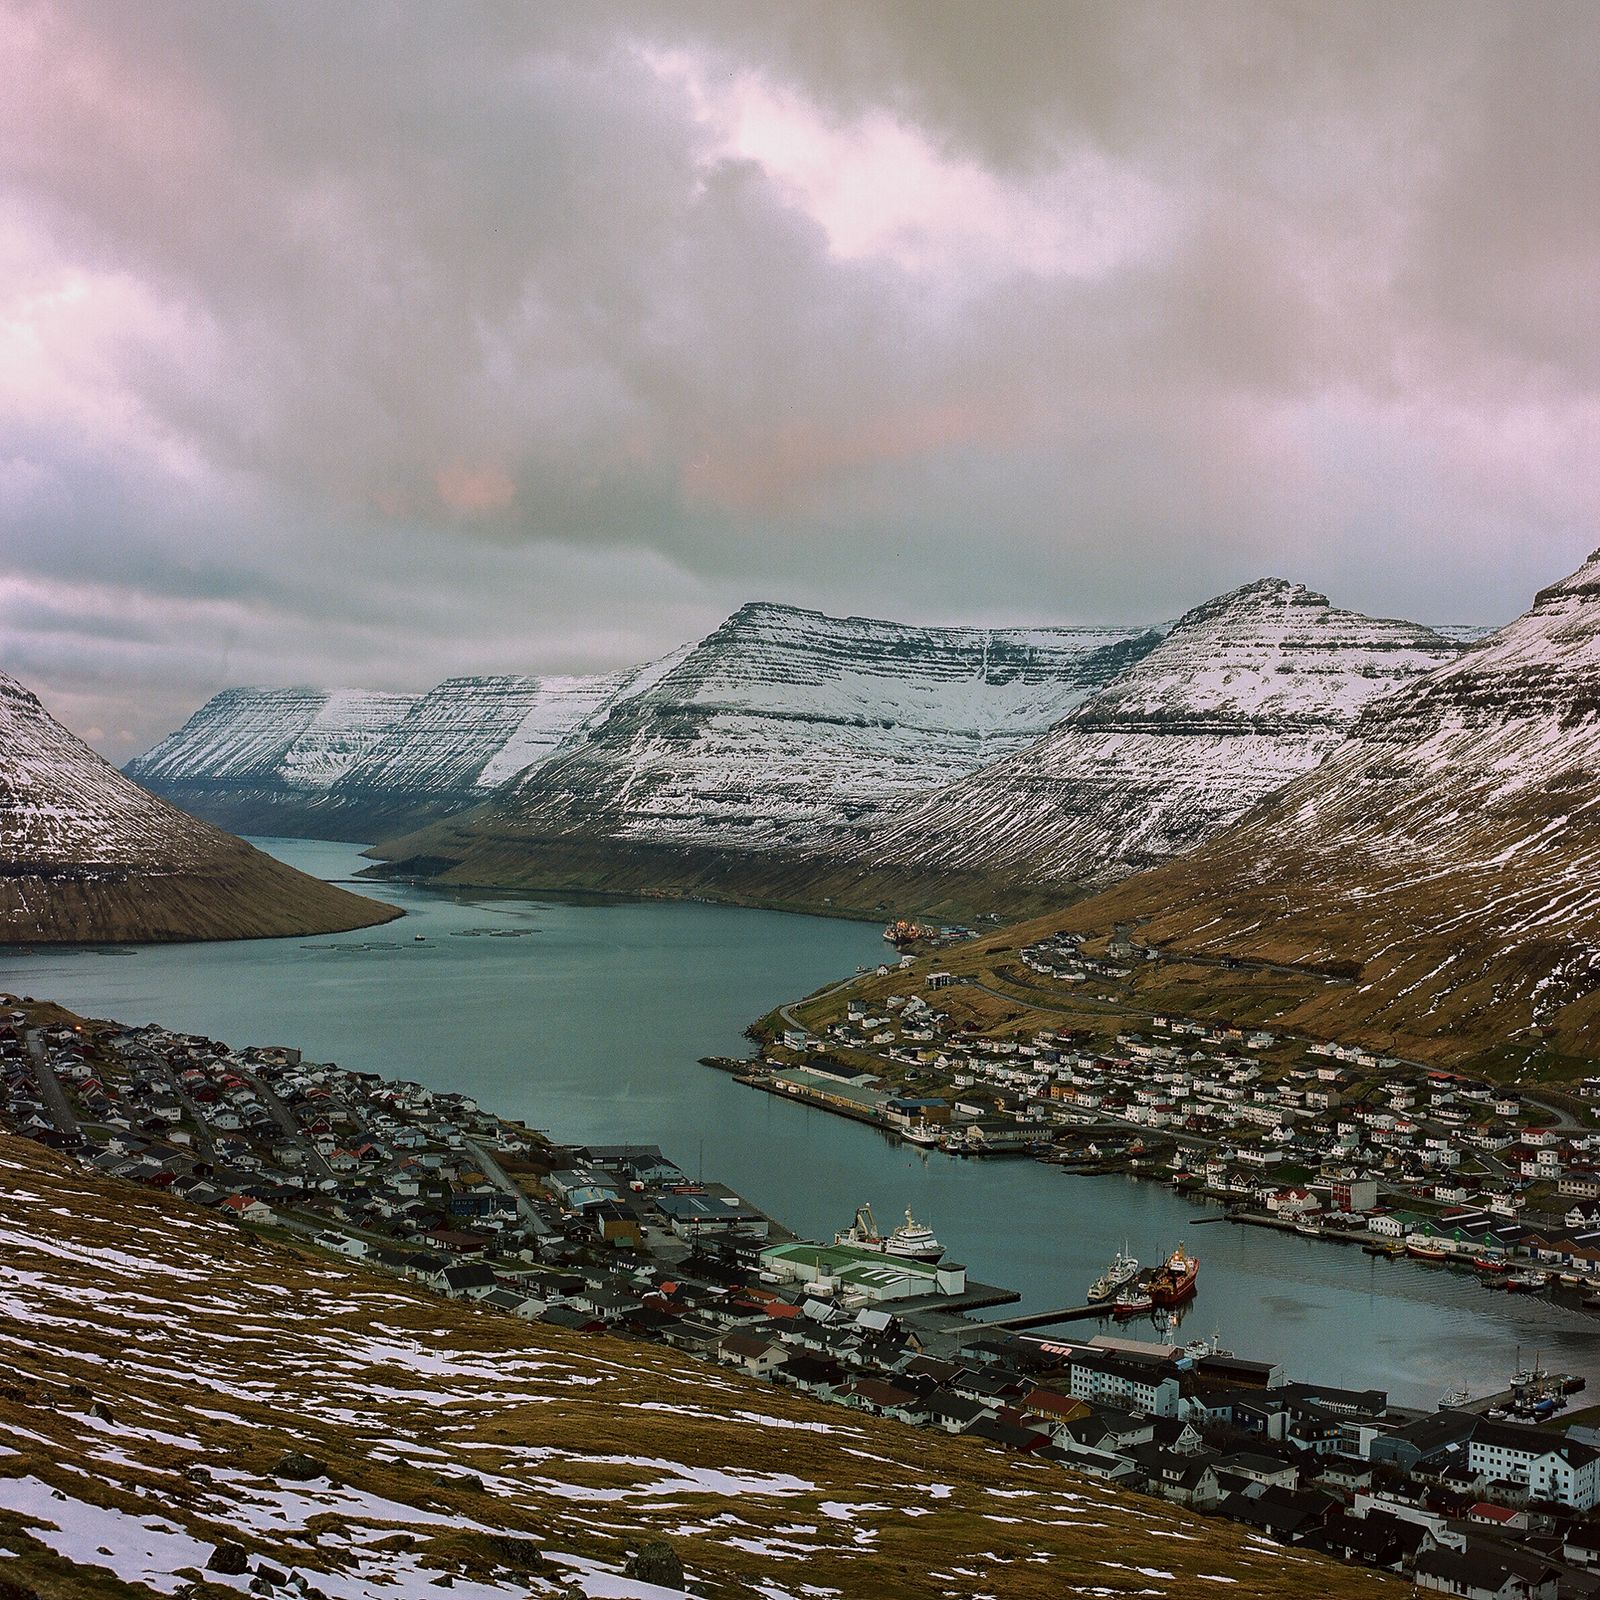 © Silvia Varela - A view of Klaksvik, capital of the northern islands and the second largest town in the Faroes.